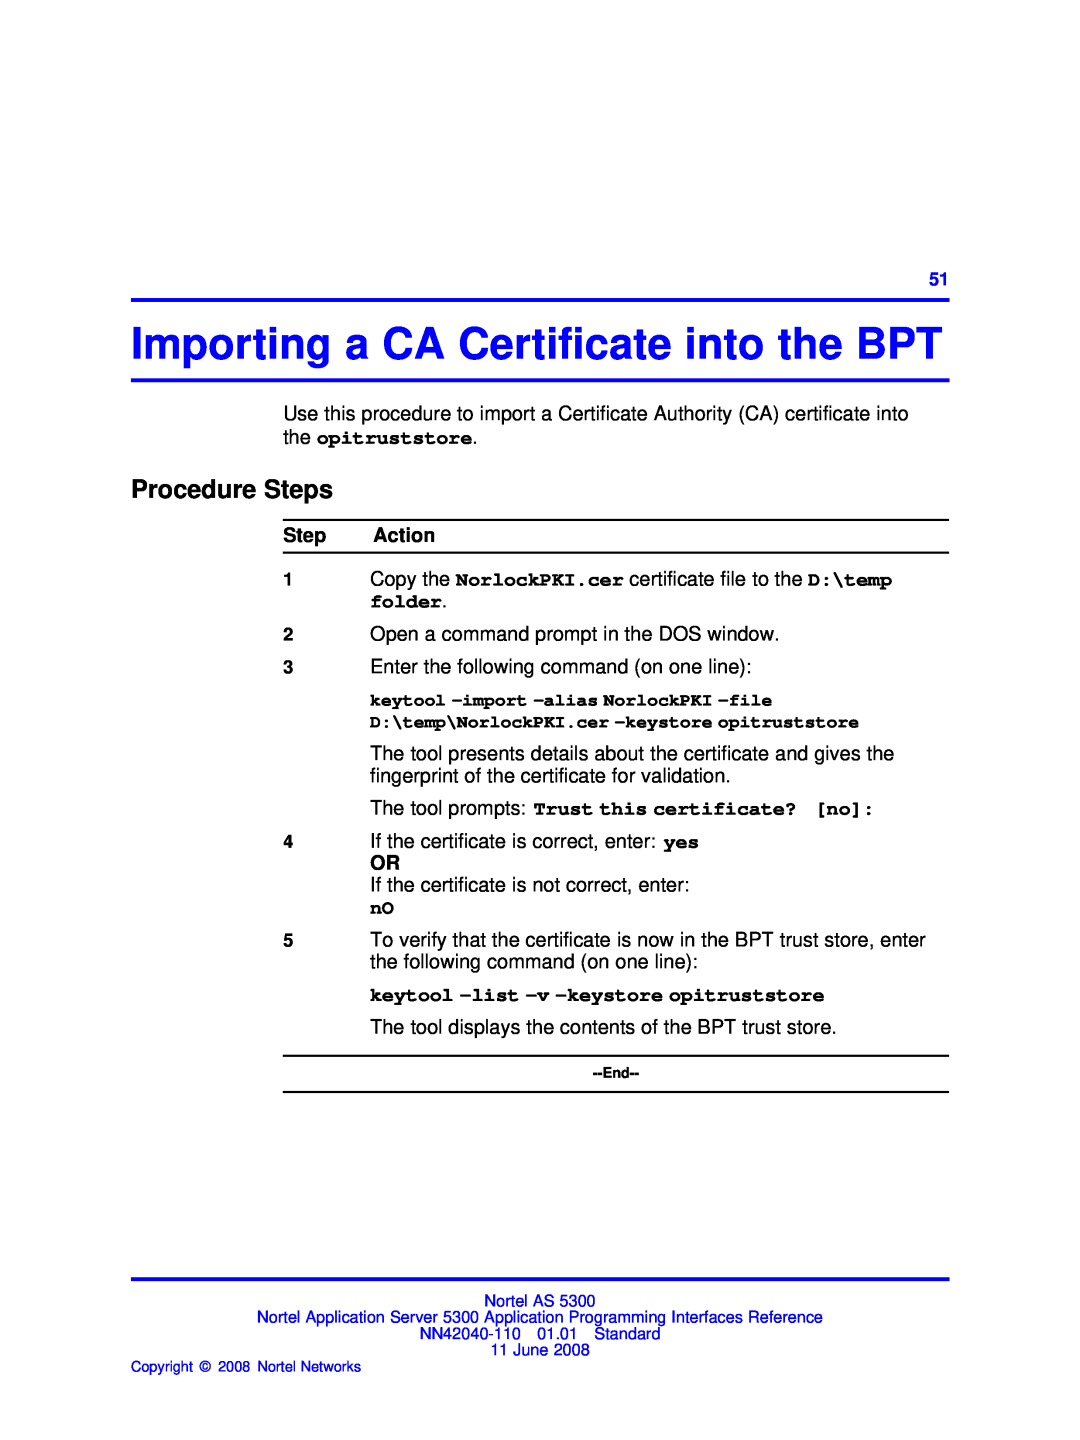 Nortel Networks AS 5300 Importing a CA Certiﬁcate into the BPT, The tool prompts Trust this certificate? no, Step Action 